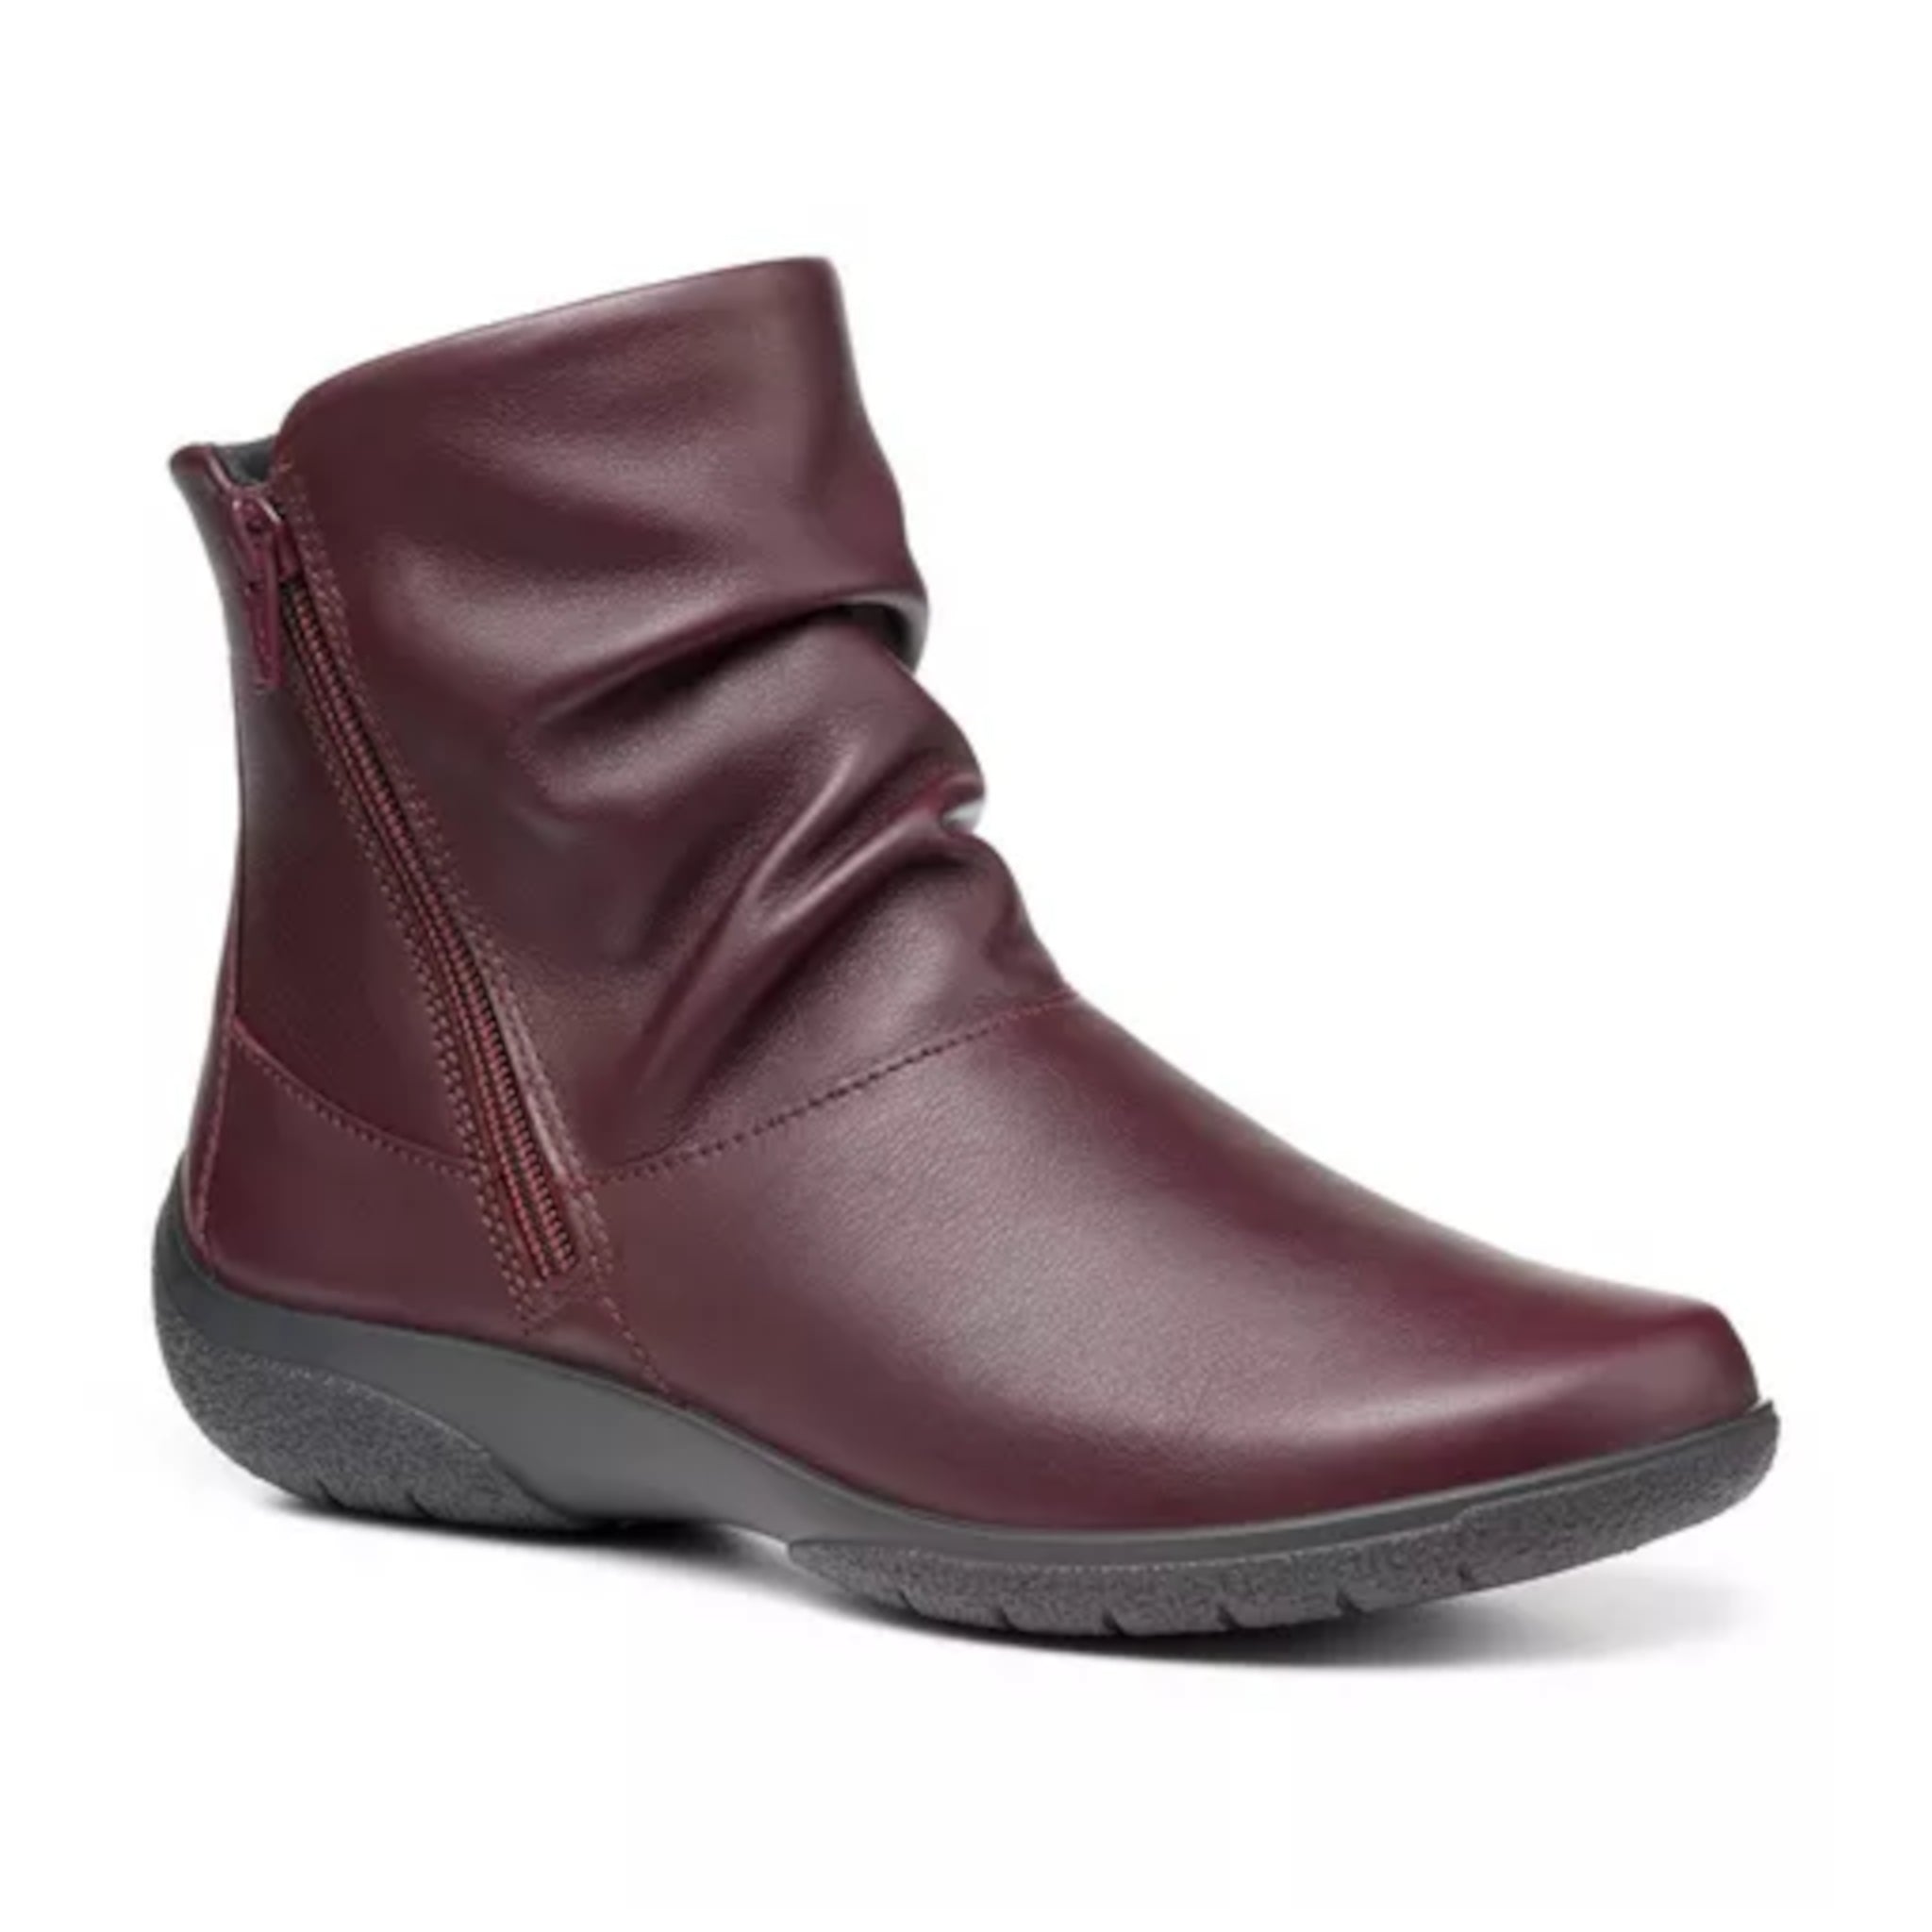 HOTTER WHISPER Boots - Wide EE Fit